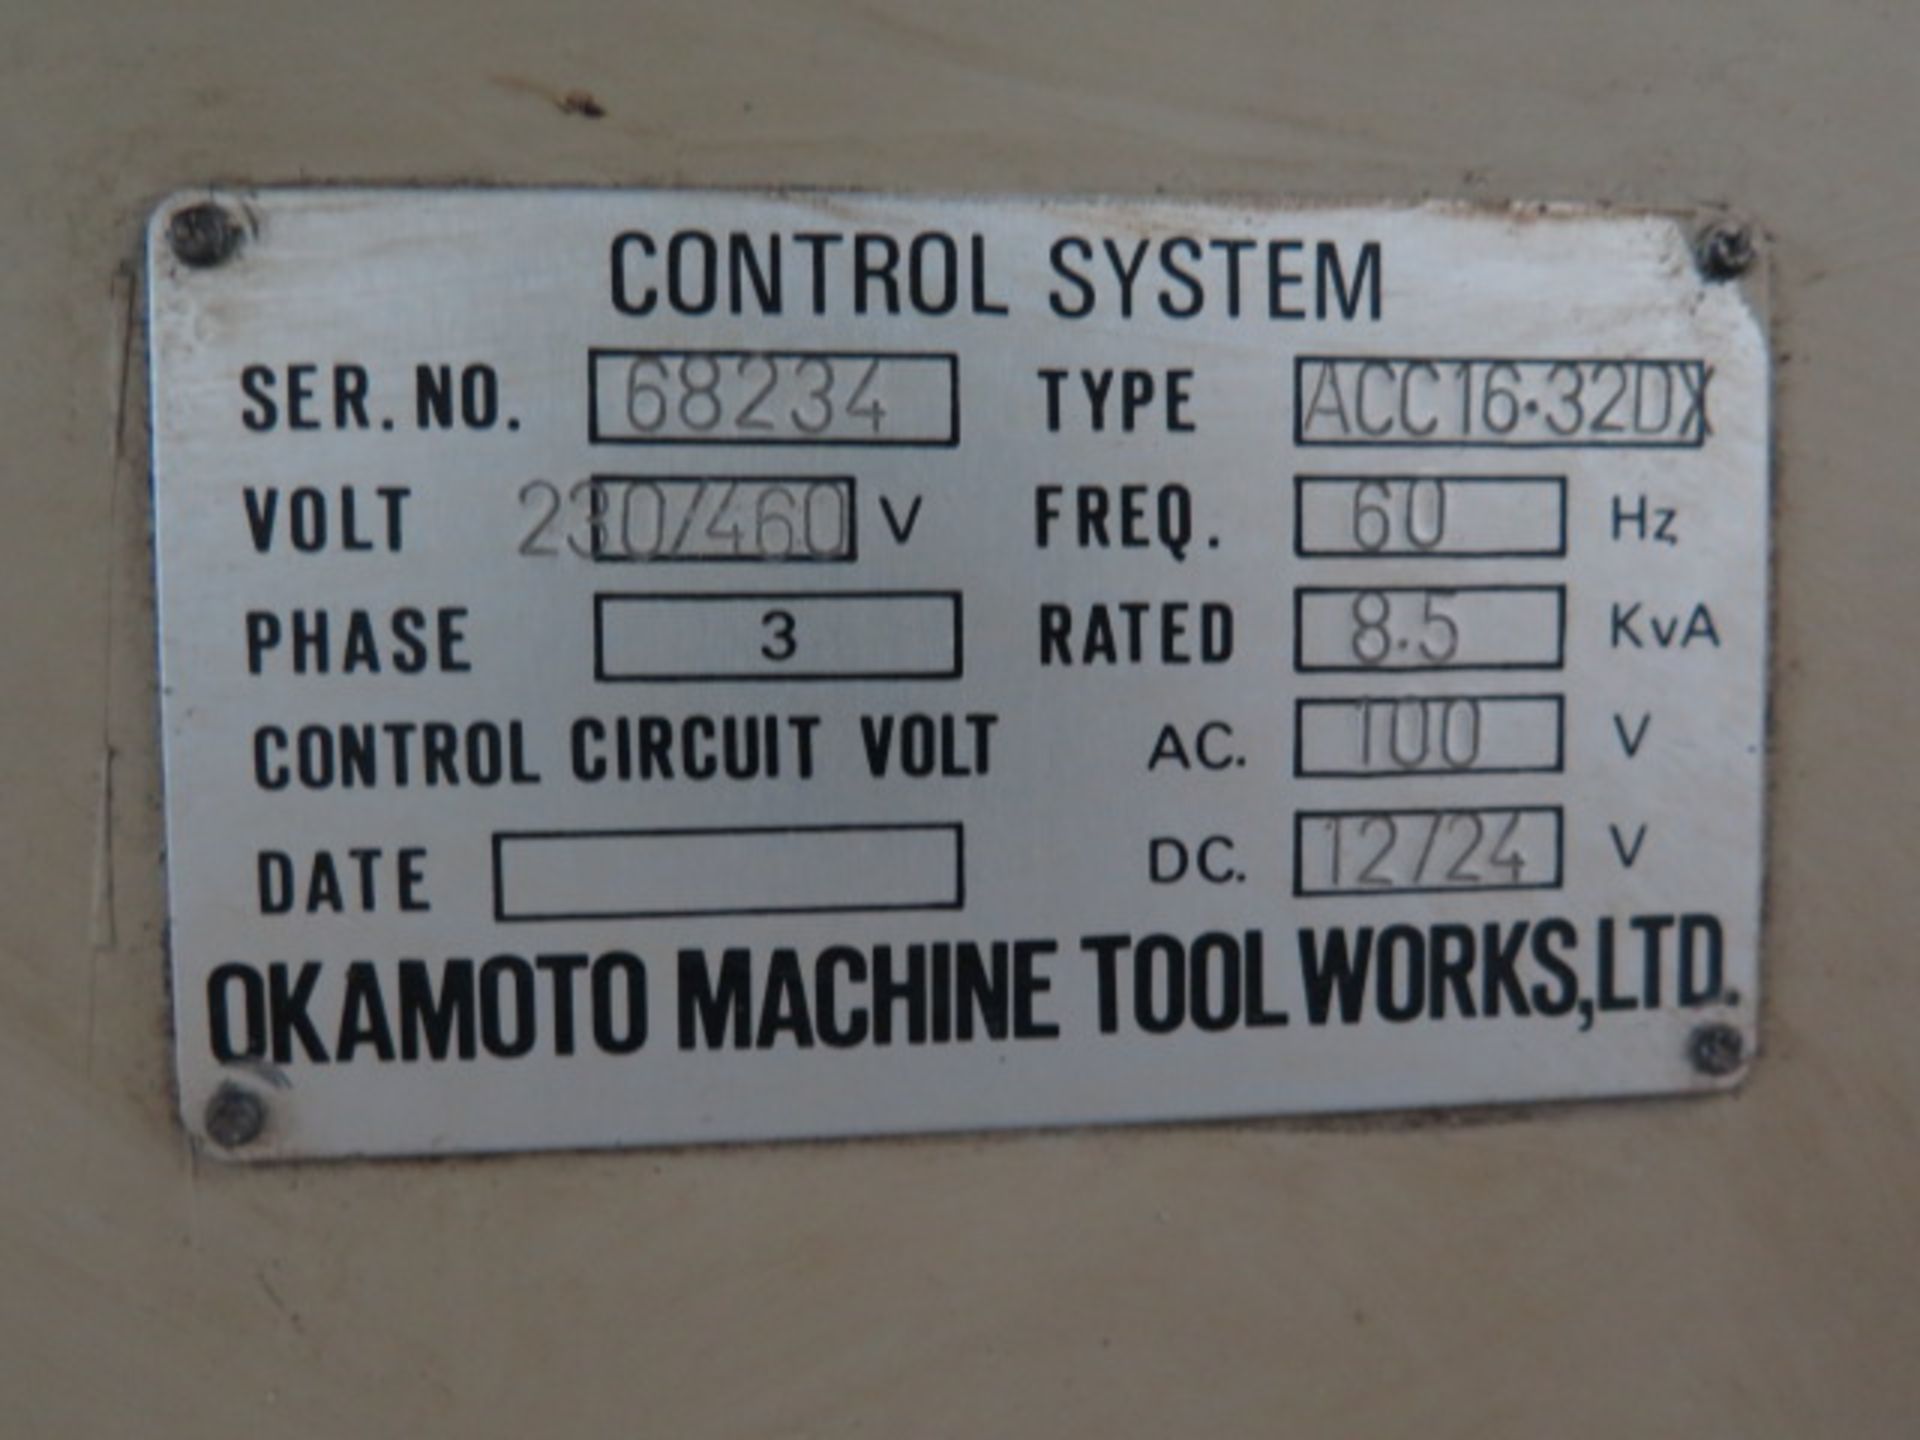 Okamoto ACC-16-32DX 16” x 32” Automatic Surface Grinder s/n 68234 w/ Okamoto Controls, SOLD AS IS - Image 13 of 13